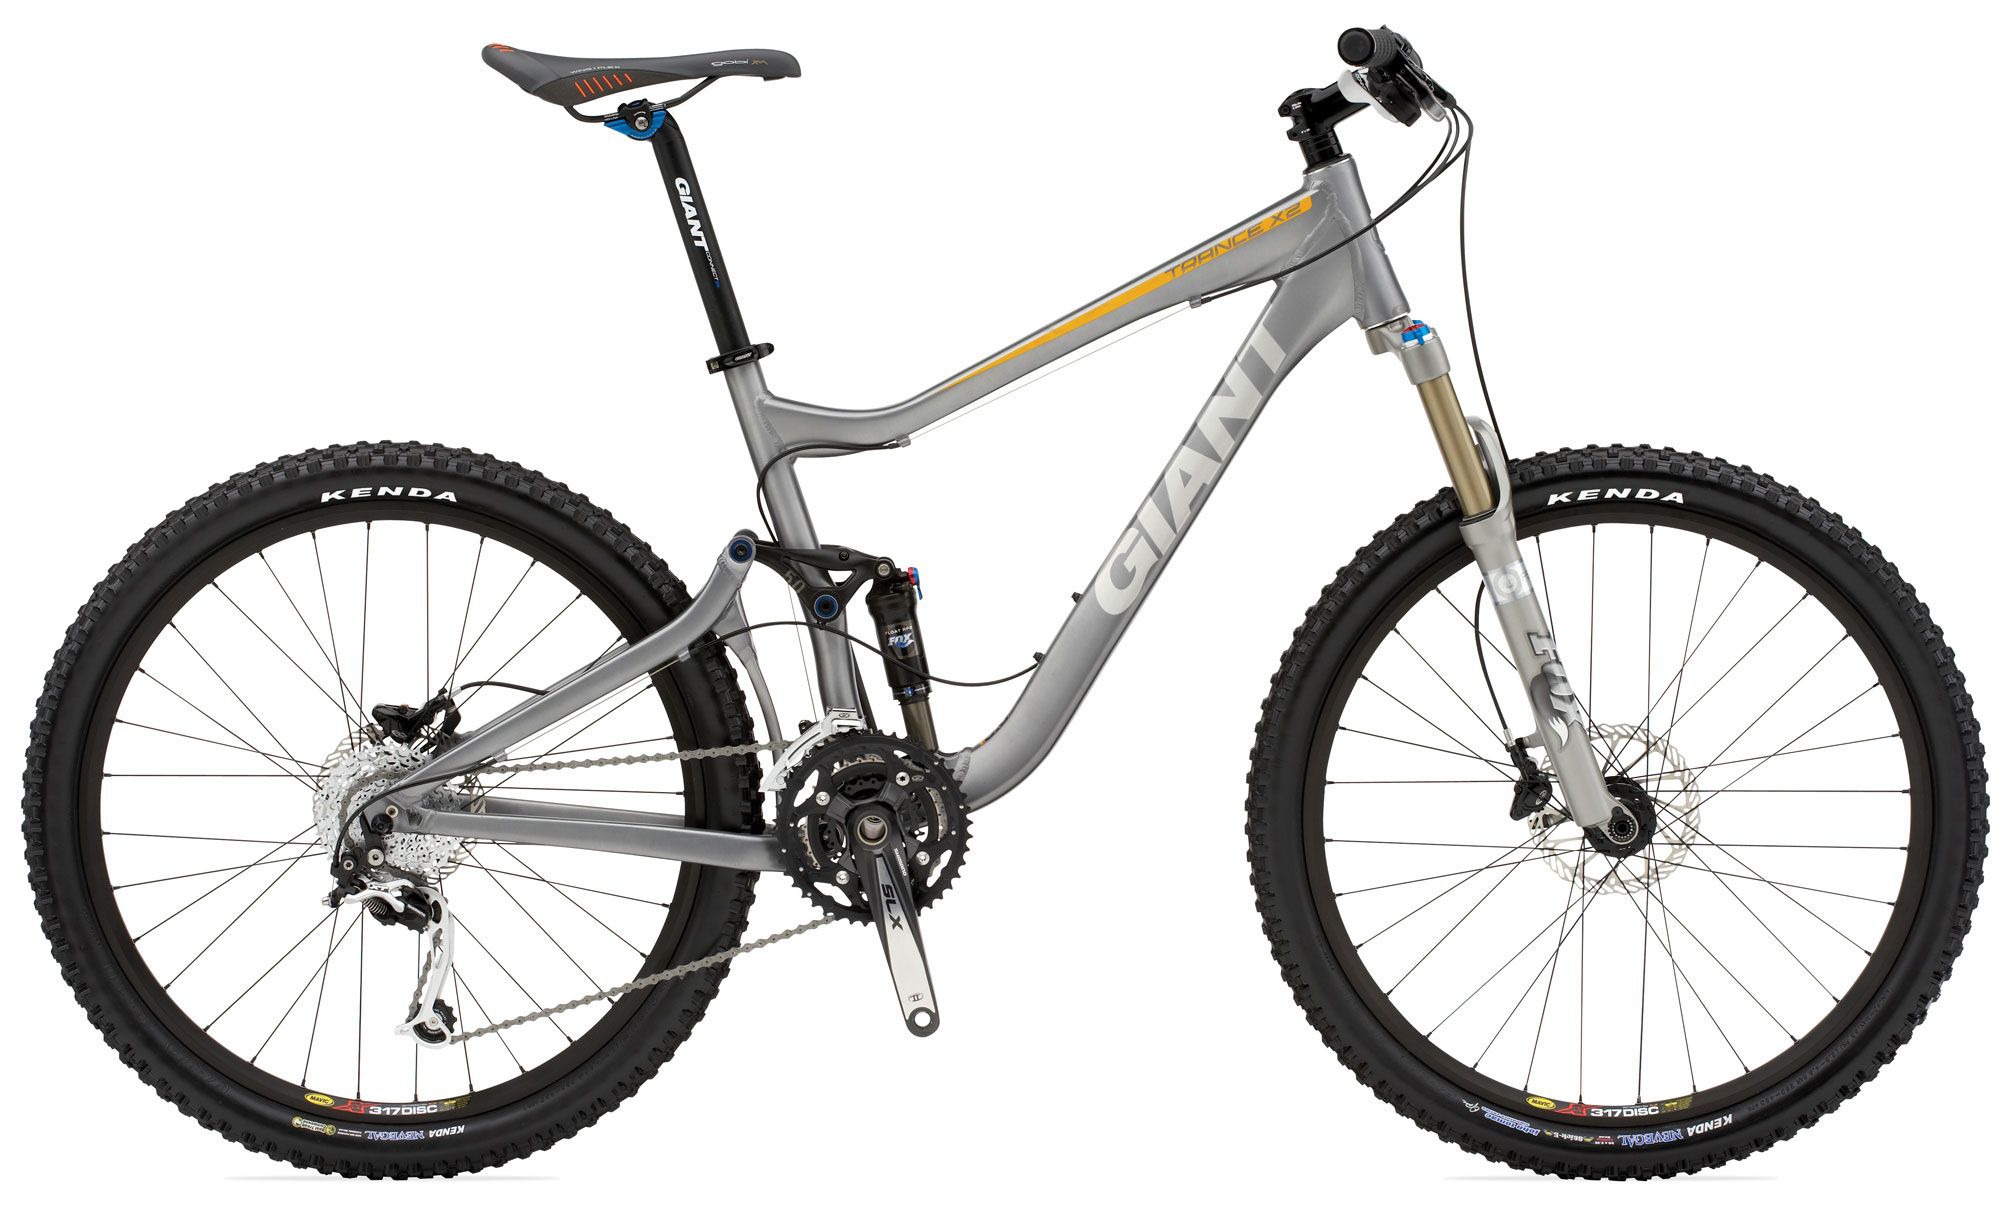 2010 Giant Trance X2 - Bicycle Details 